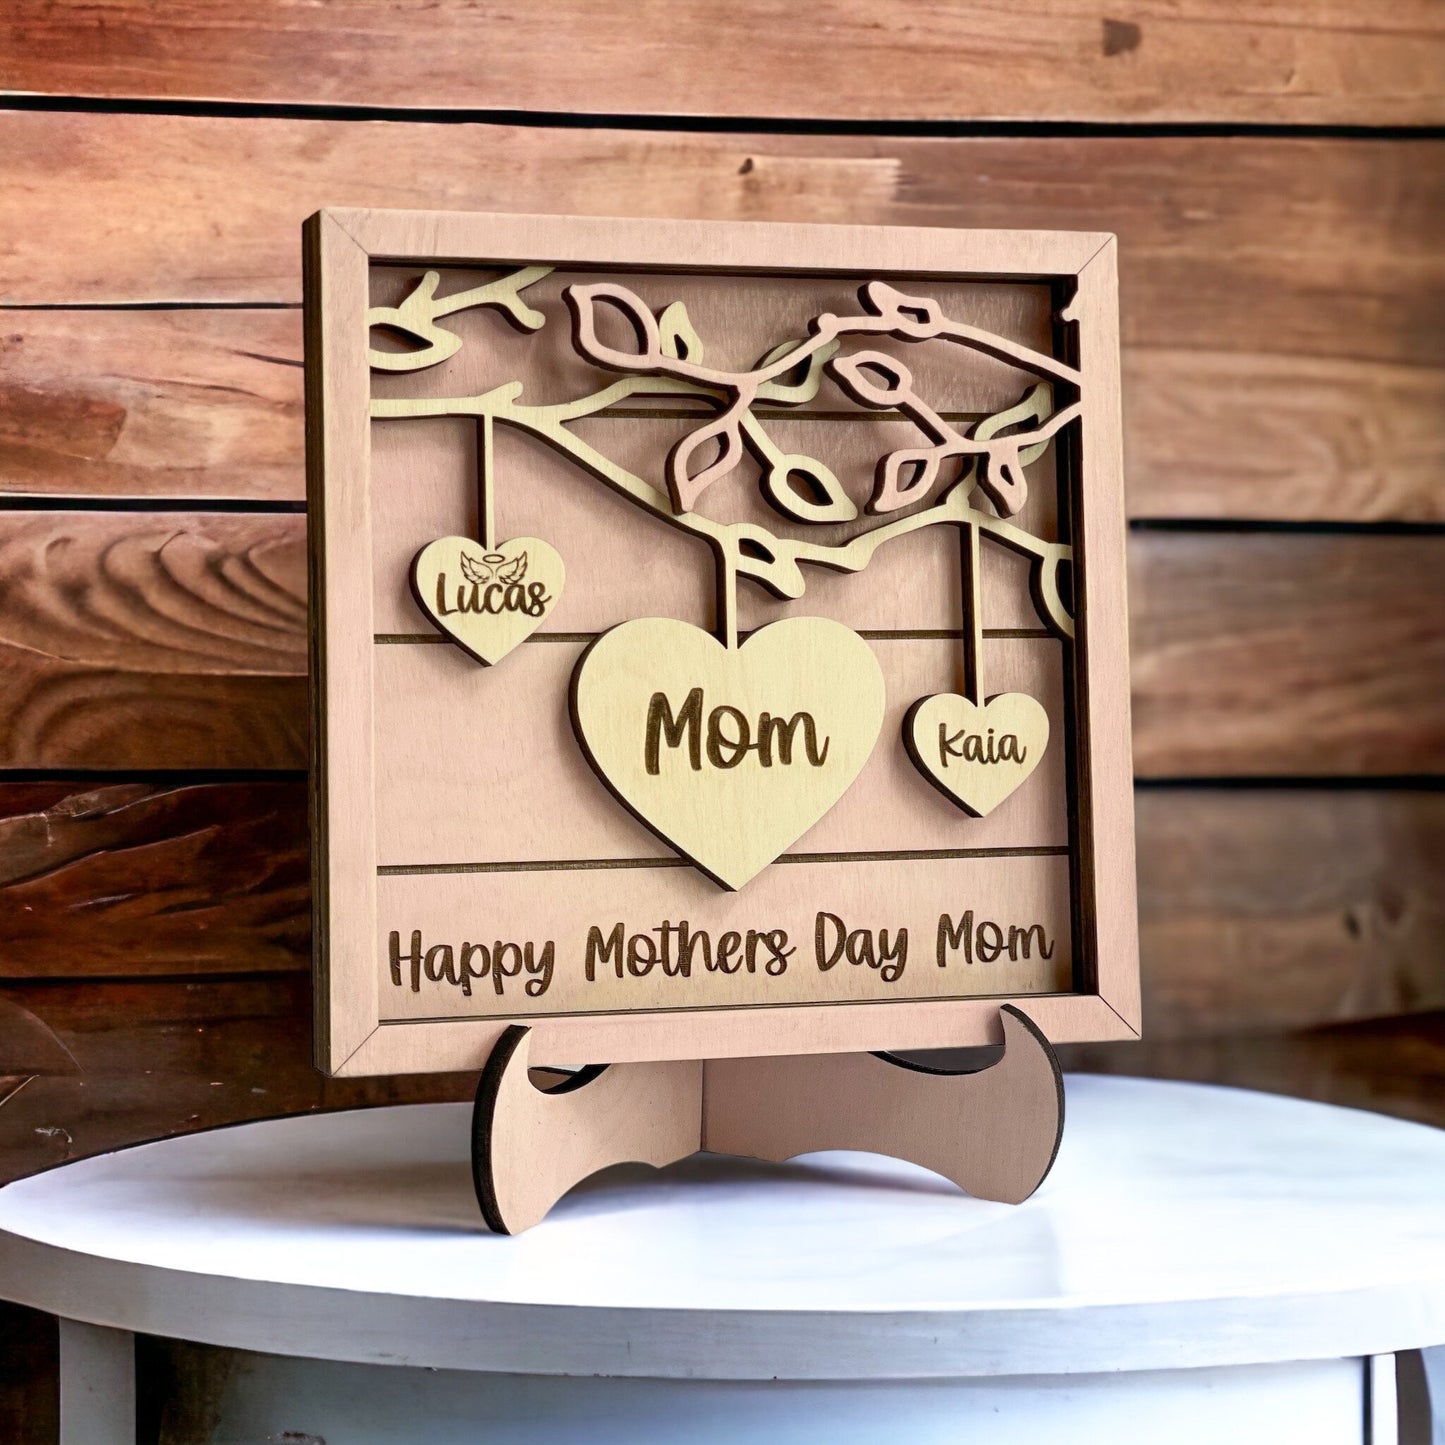 Mothers Day Gift, Family Gift, Grandparents Gift, Mothers Day, Hanging Hearts, Family Tree Sign, Gift for Mom, Mom Signs with Kids Names